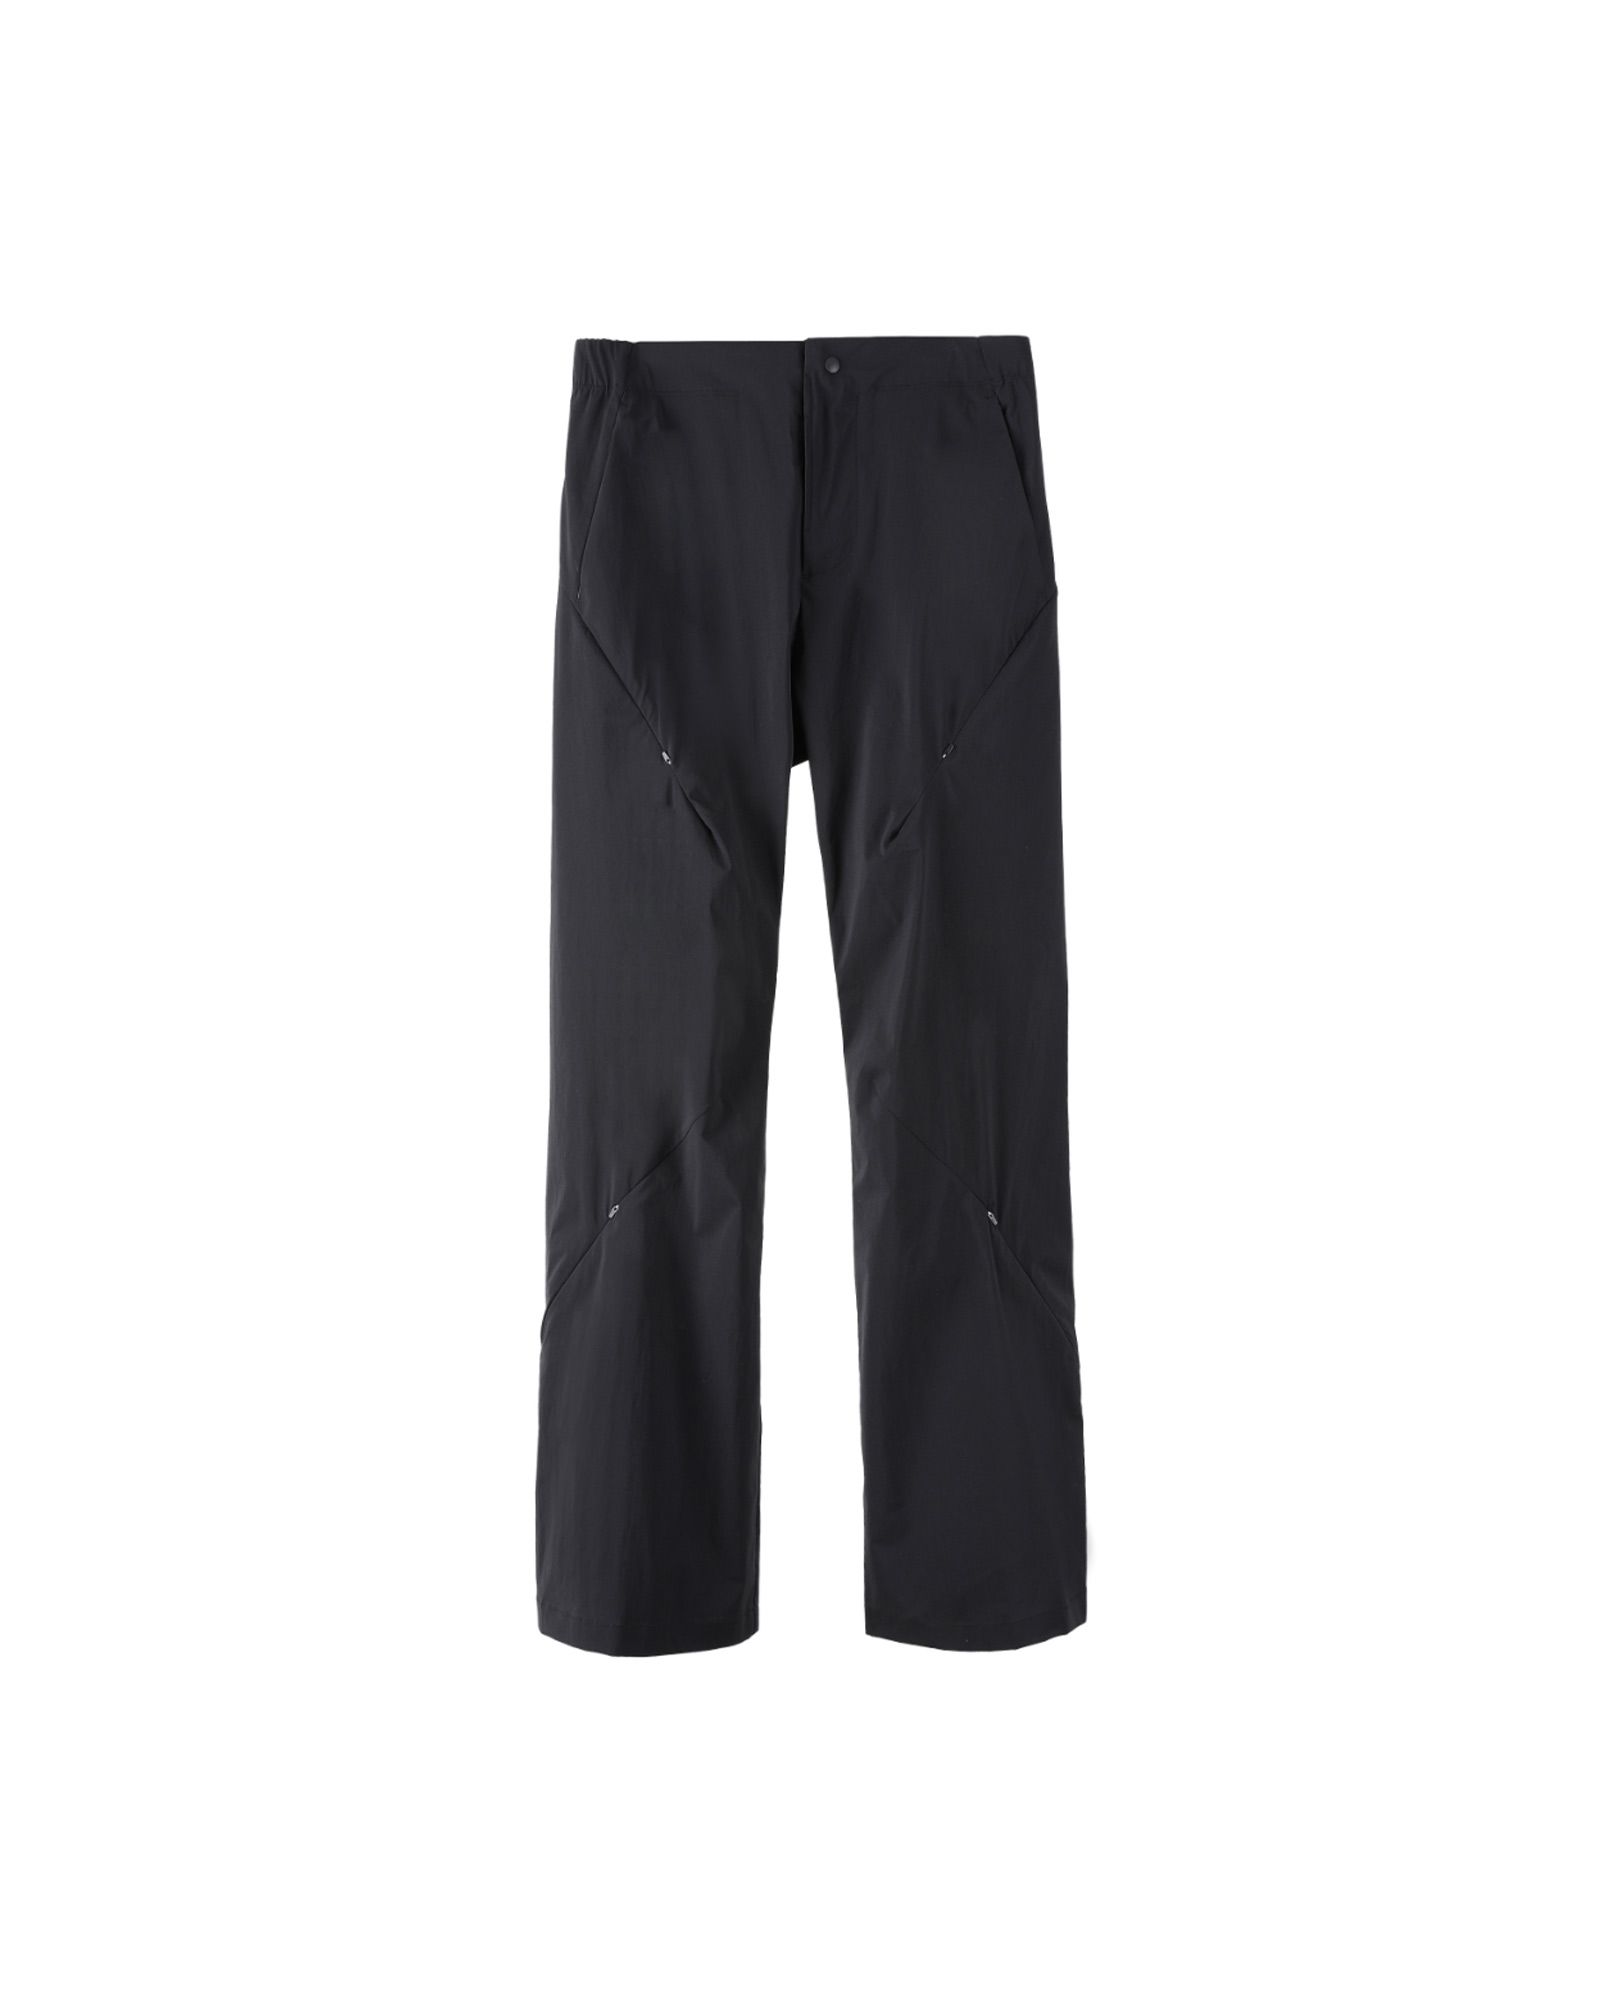 POST ARCHIVE FACTION - 5.0 TECHNICAL PANTS RIGHT | Detail